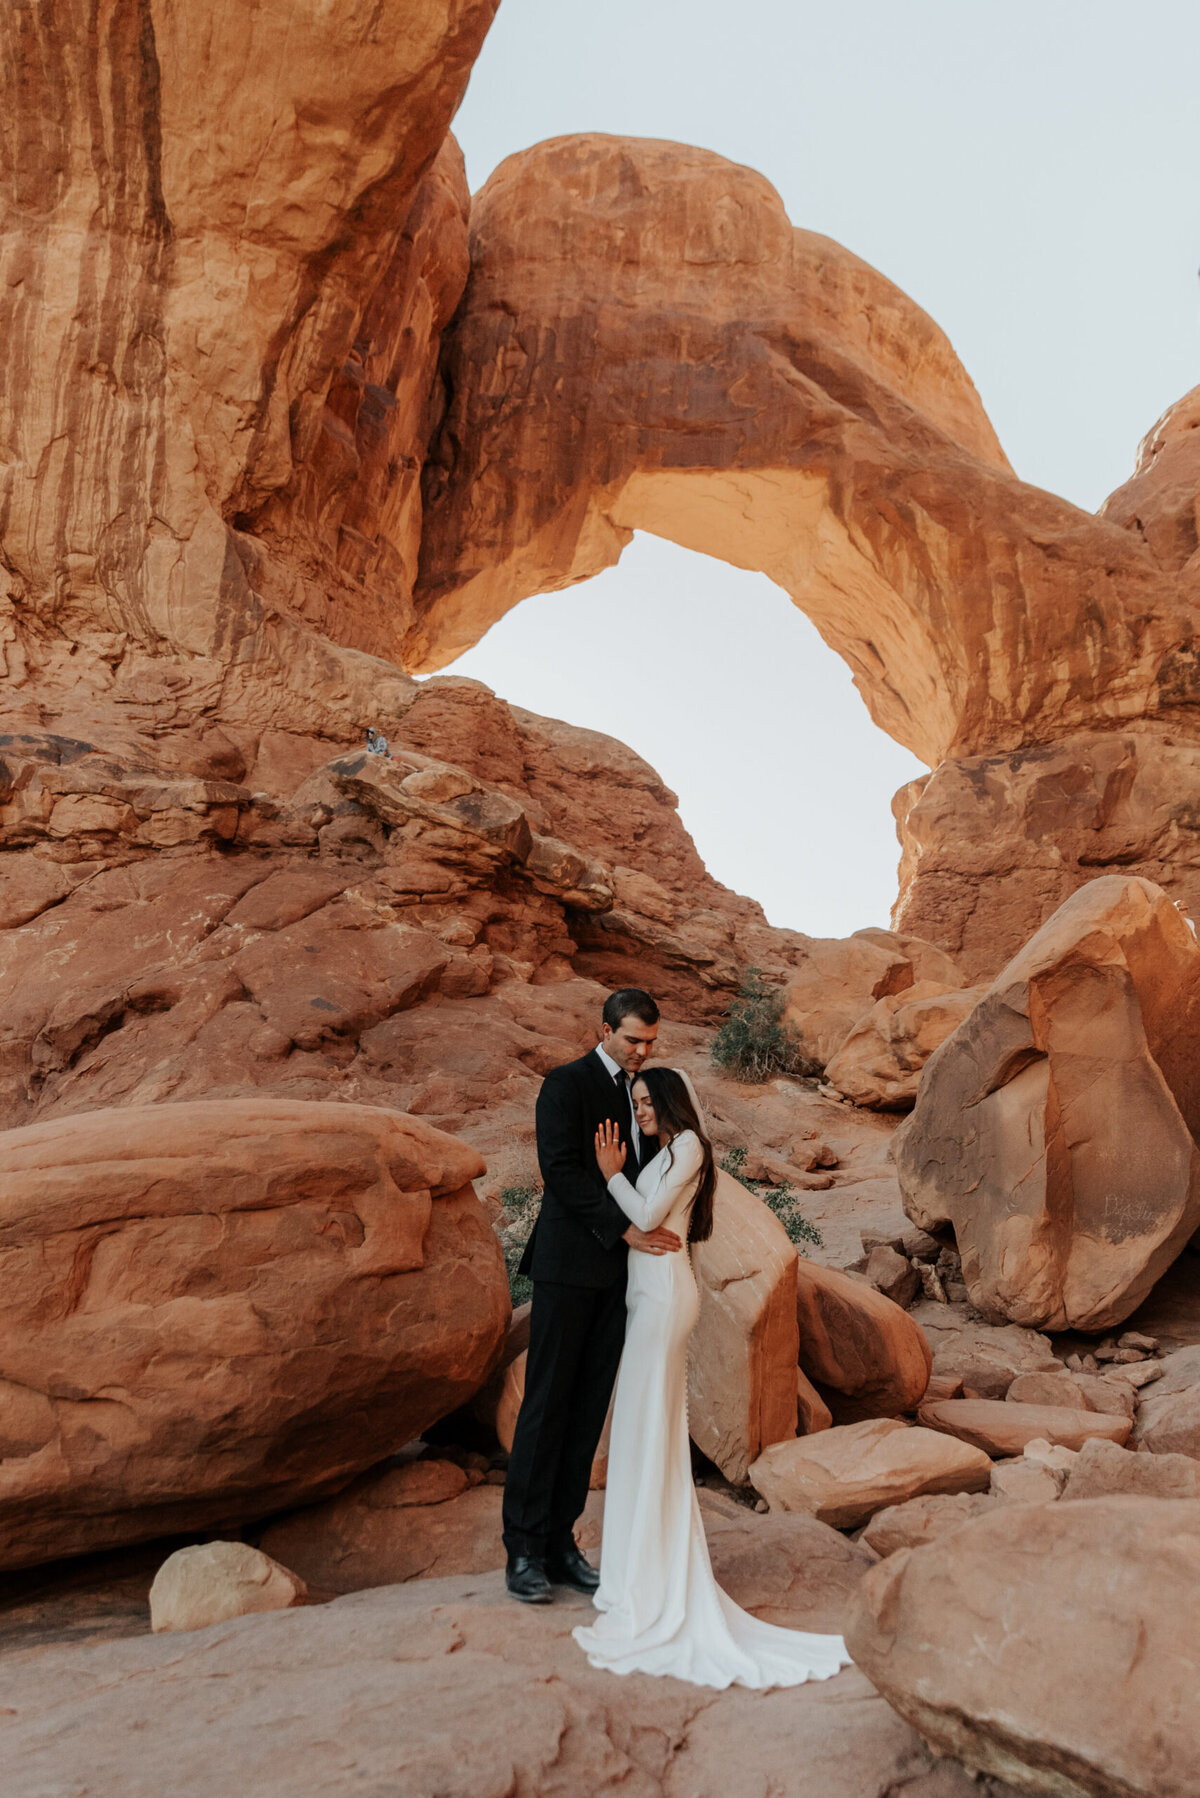 Couple Elopes In Arches national Park